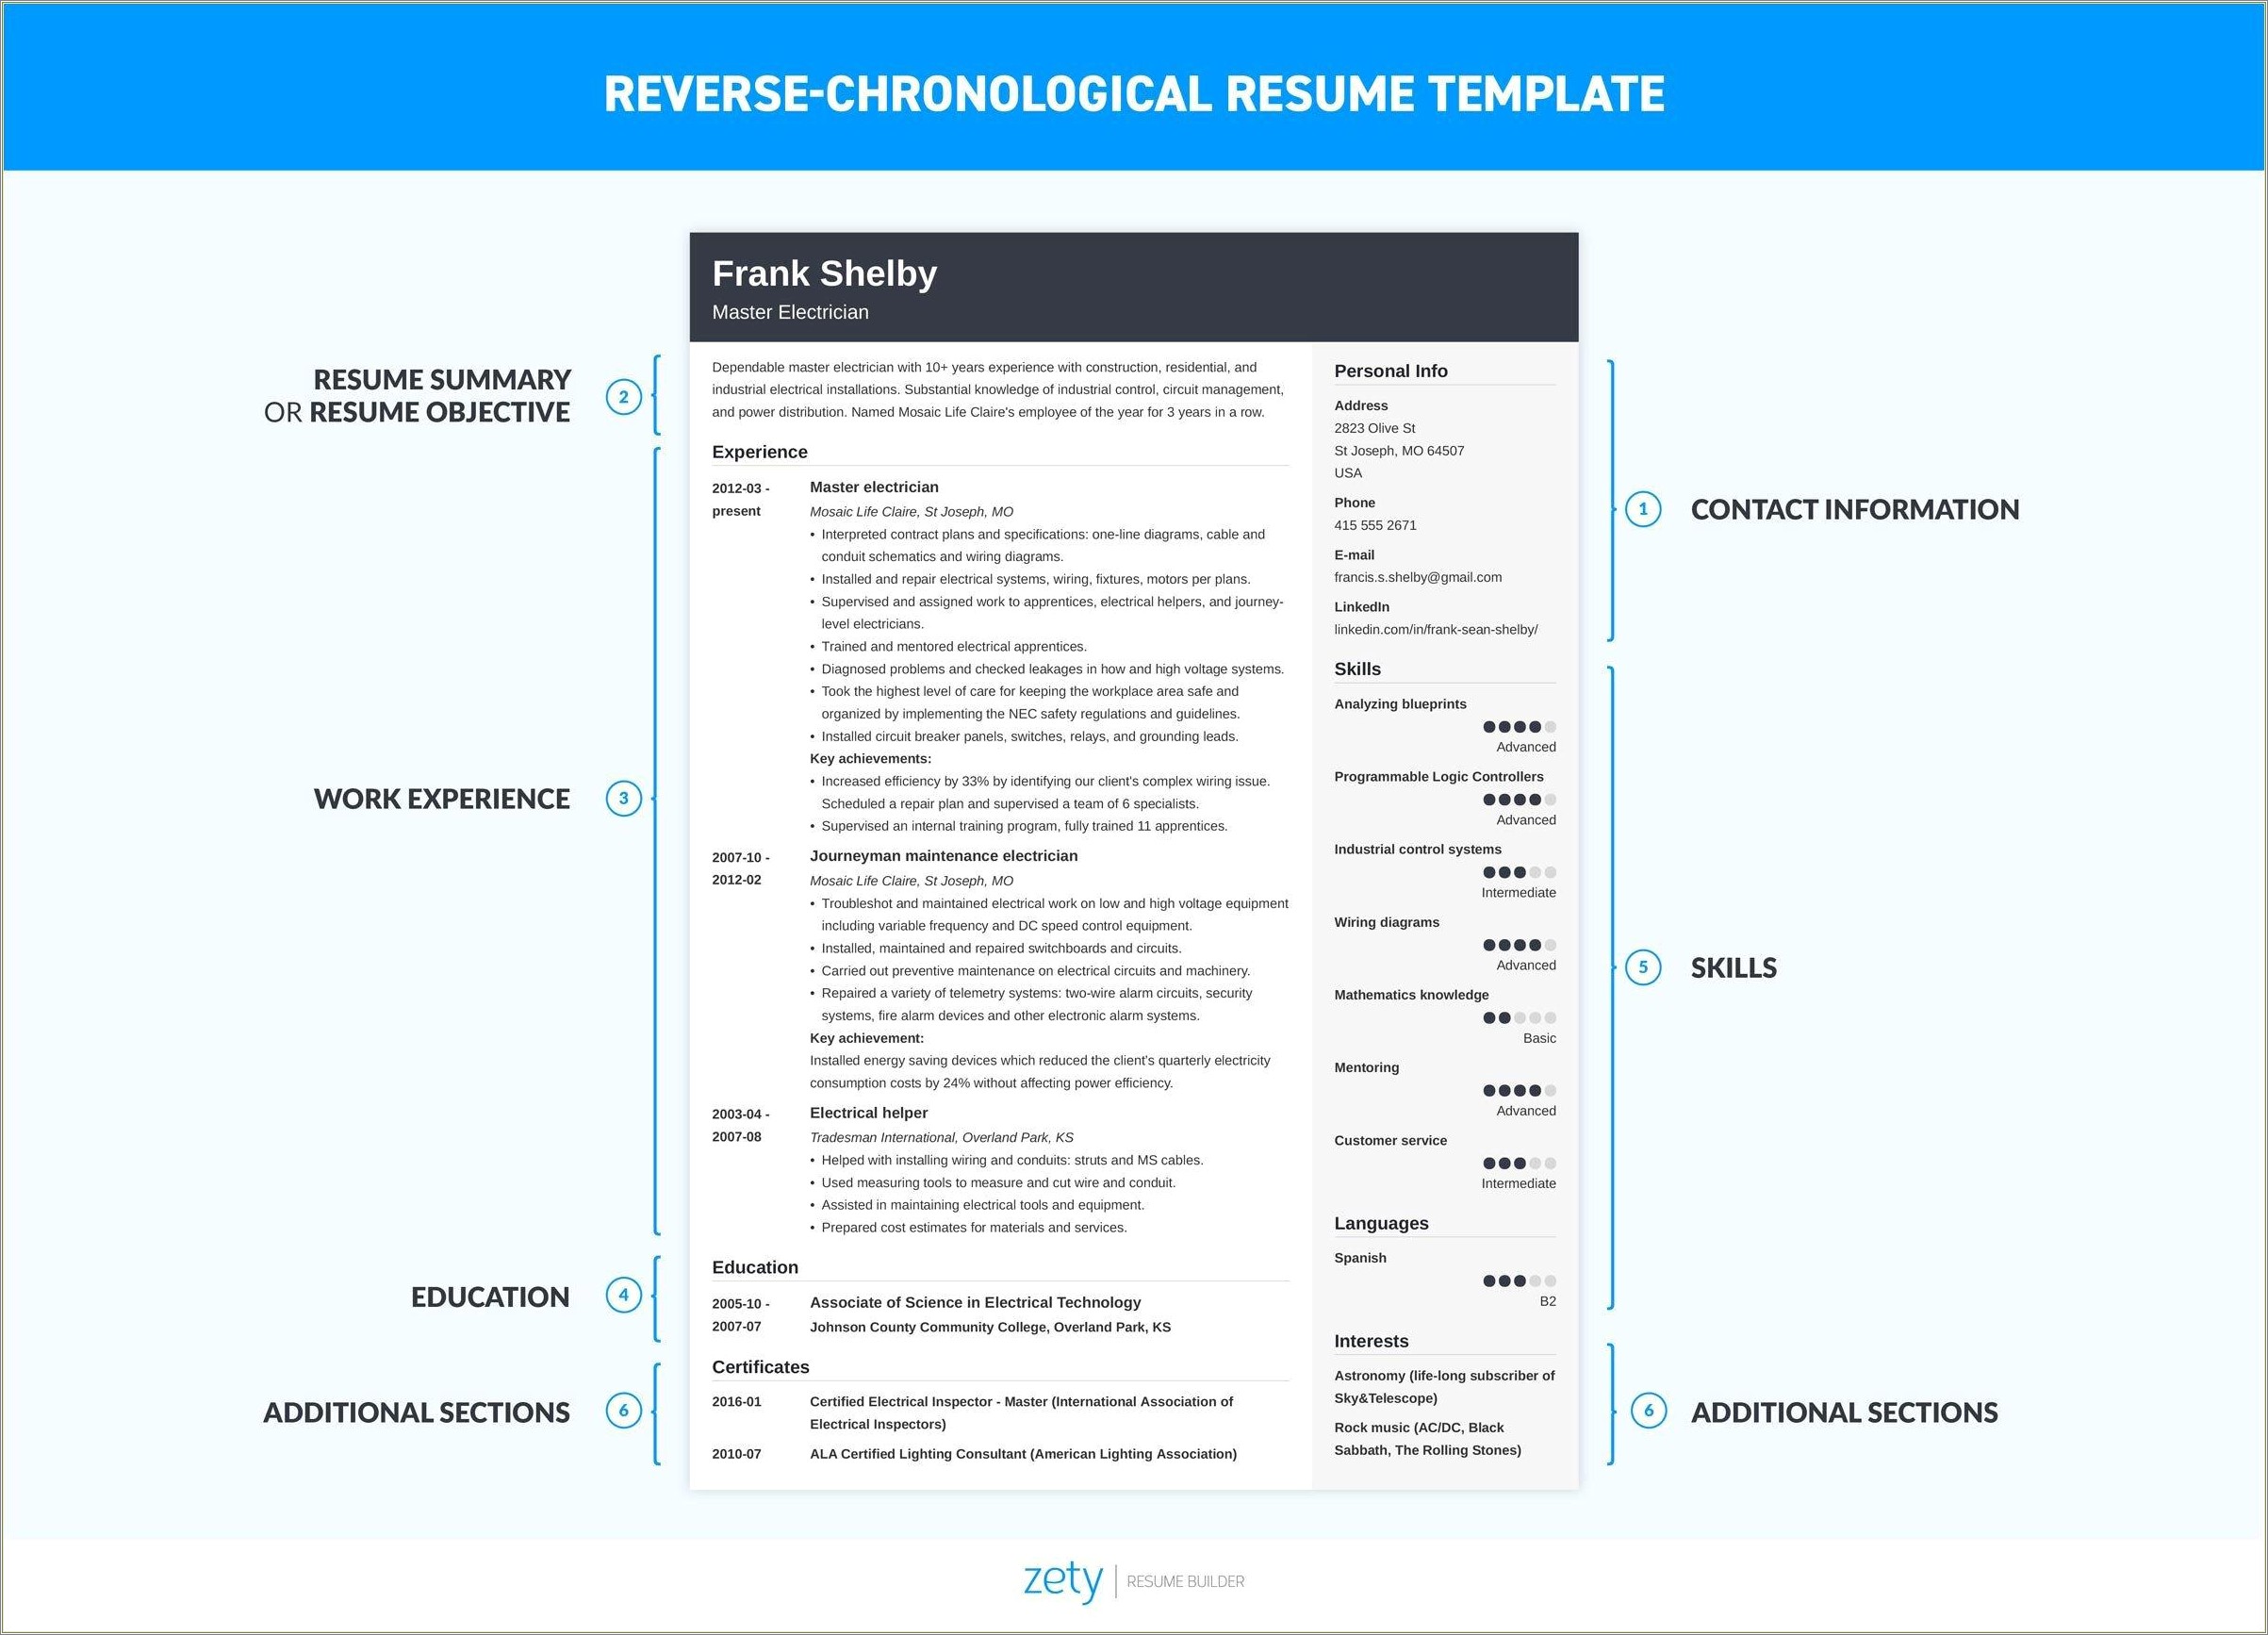 create-your-own-word-resume-template-resume-example-gallery